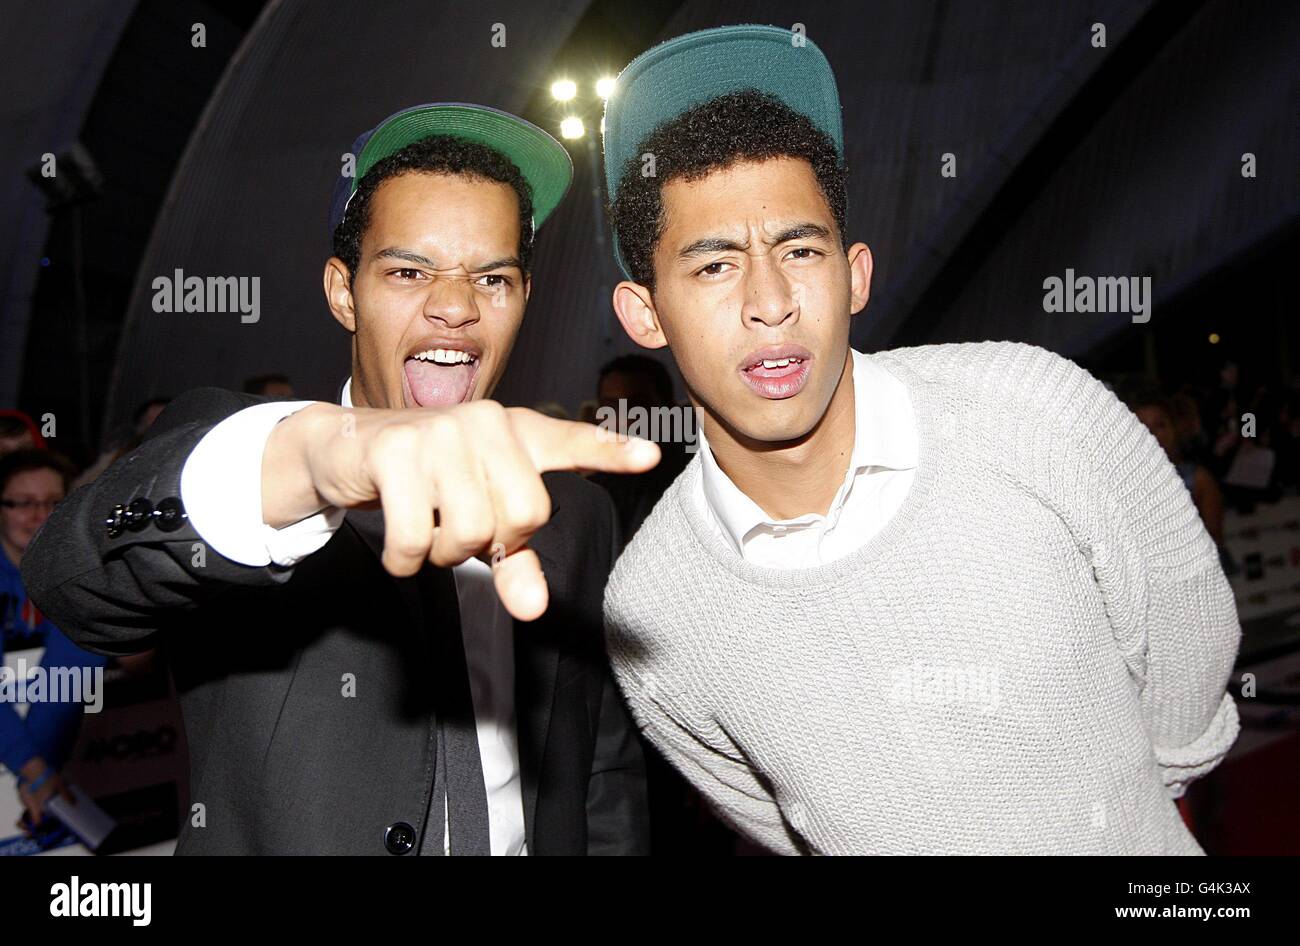 Jordan 'Rizzle' Stevens and Harley 'Sylvester' Alexander-Sule (left) AKA Rizzle Kicks arriving for the MOBO Awards 2011, at the SECC, Glasgow, G3 8YW. Stock Photo